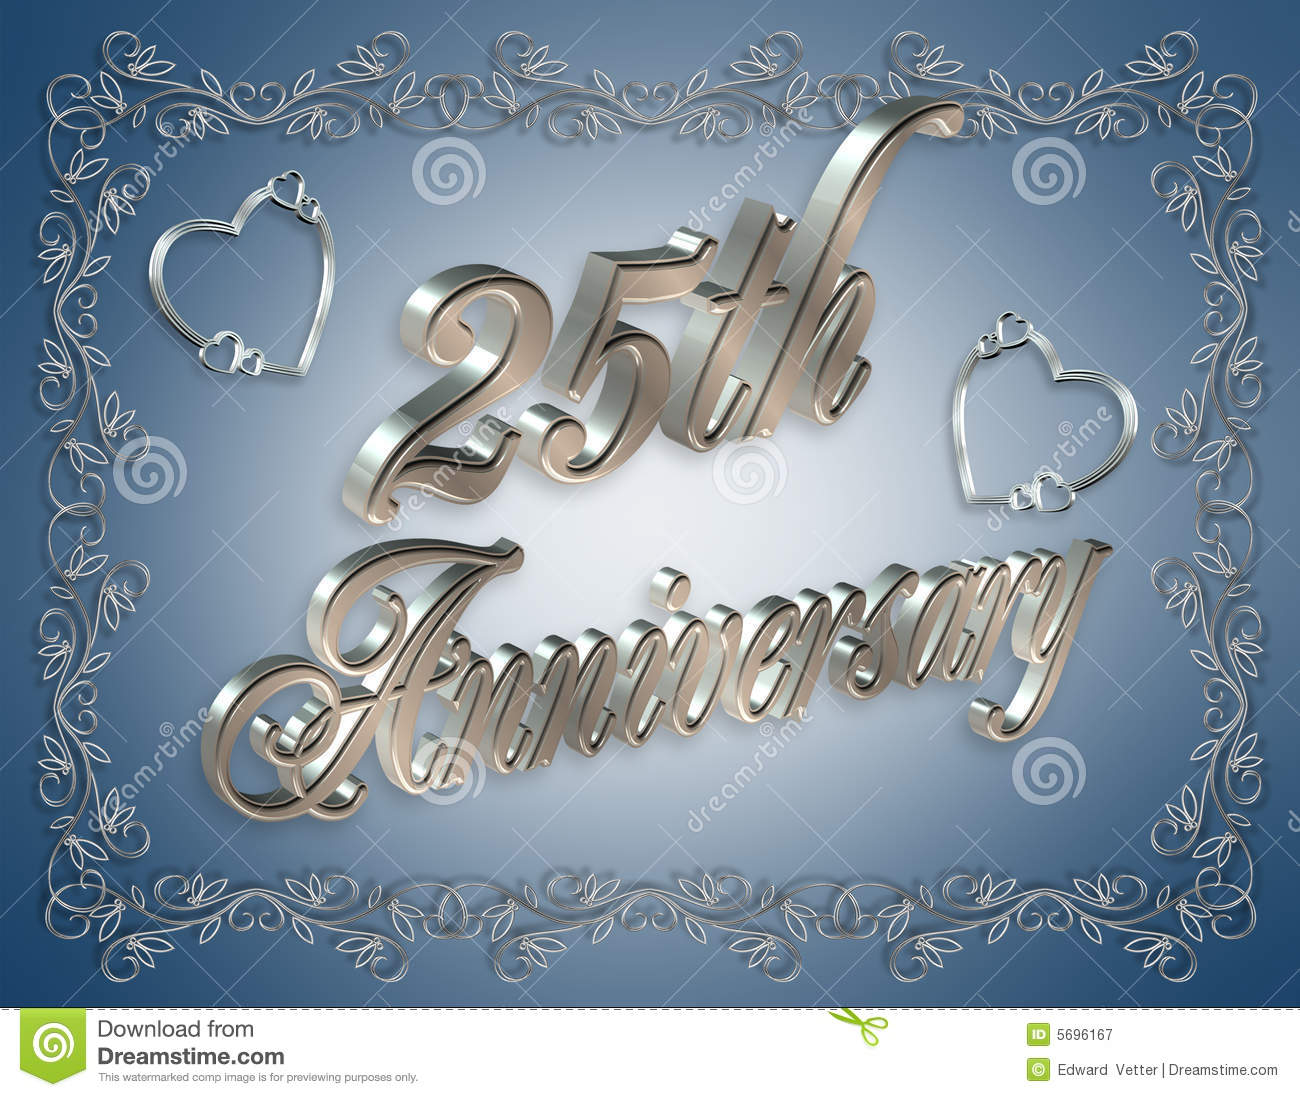 Design For 25th Anniversary Background Or Invitation With Silver Text